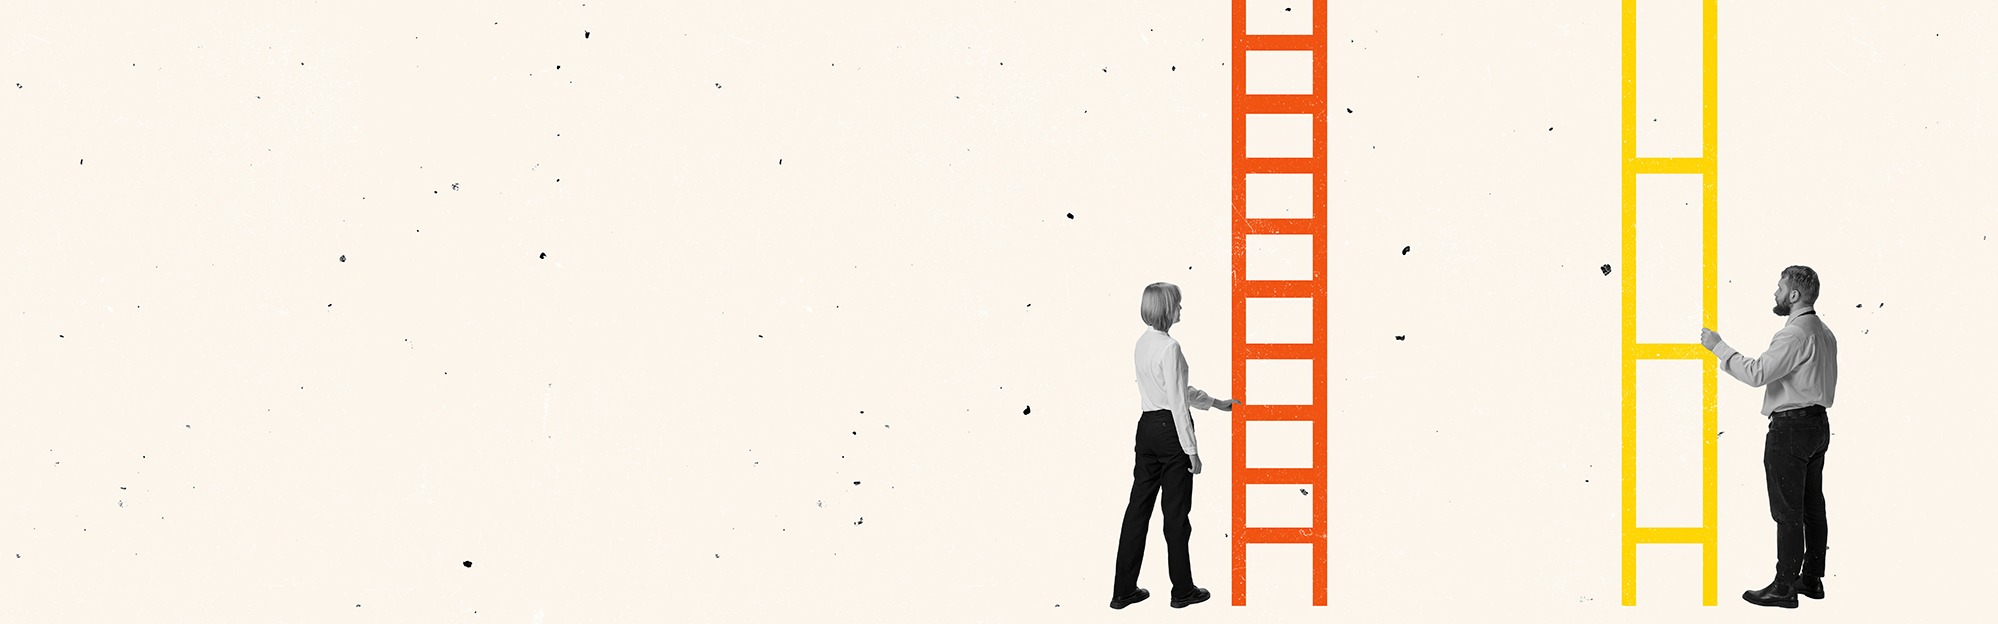 A man and woman stand holding ladders of success with unequal steps.